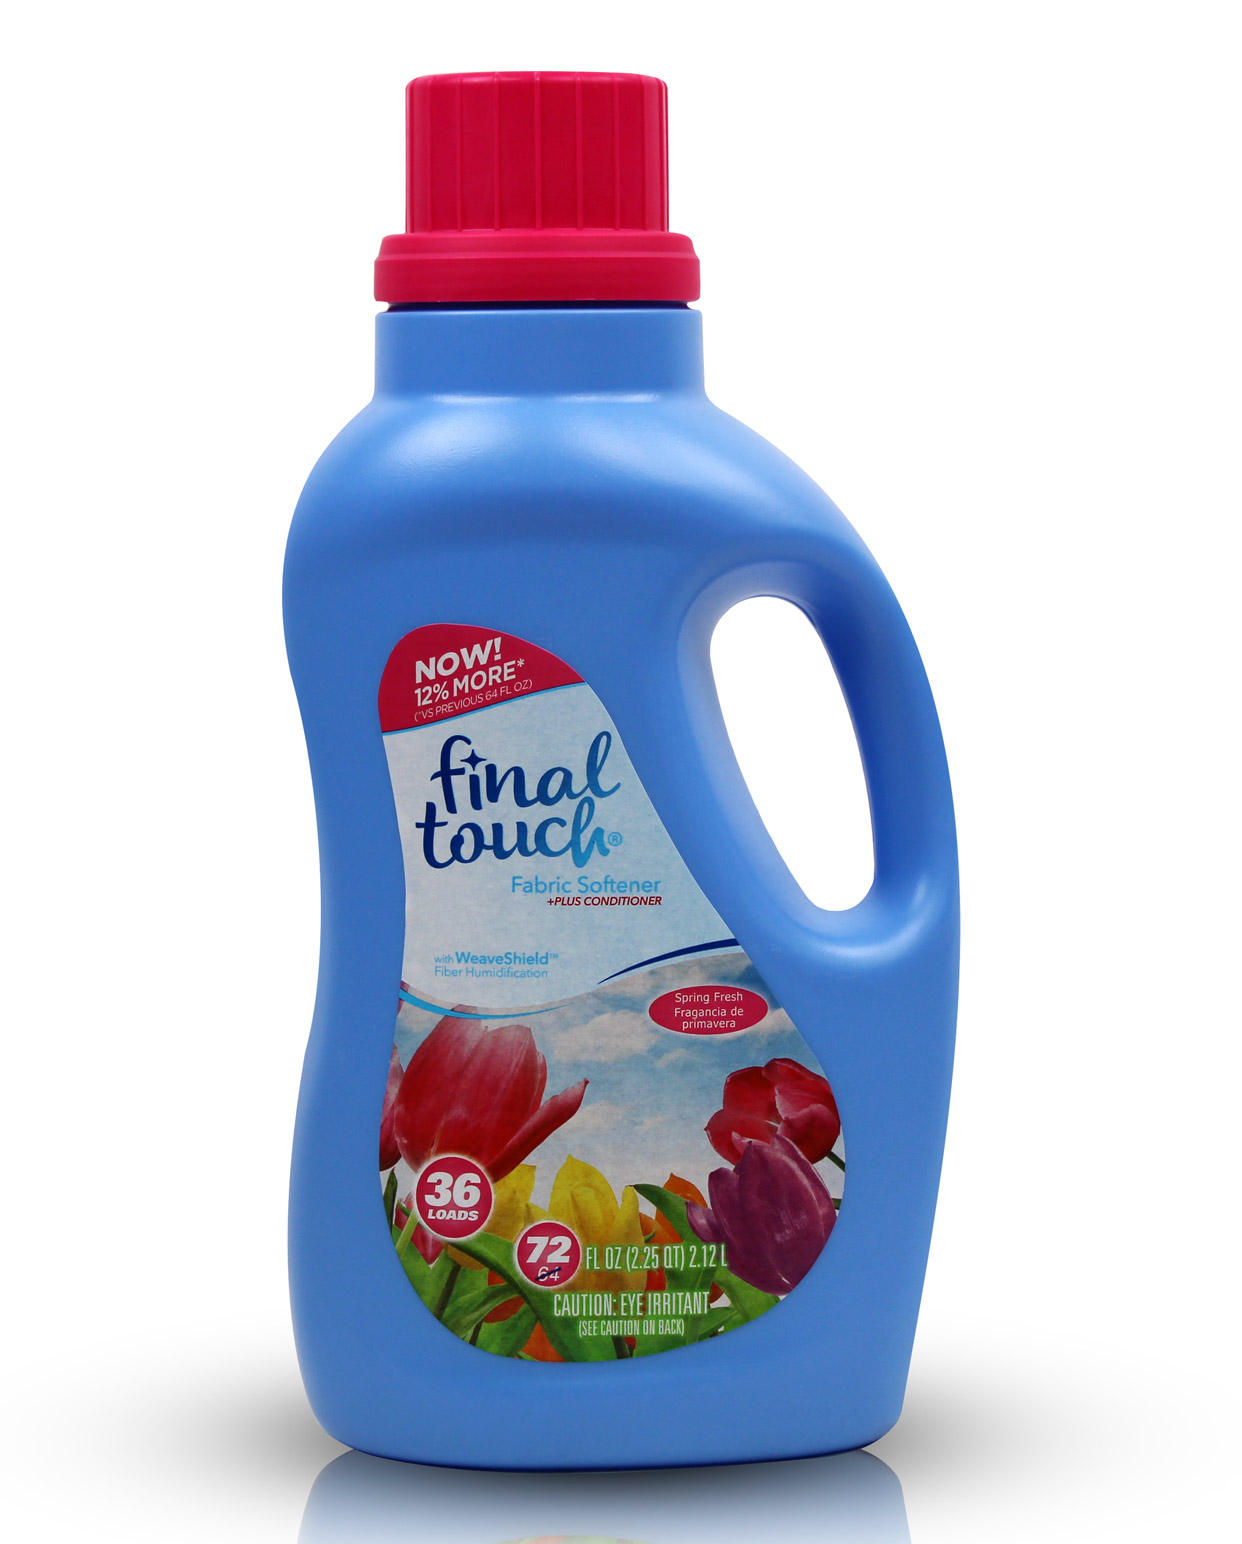 72oz bottle of Concentrated Fabric Softener with Spring Fresh Scent.